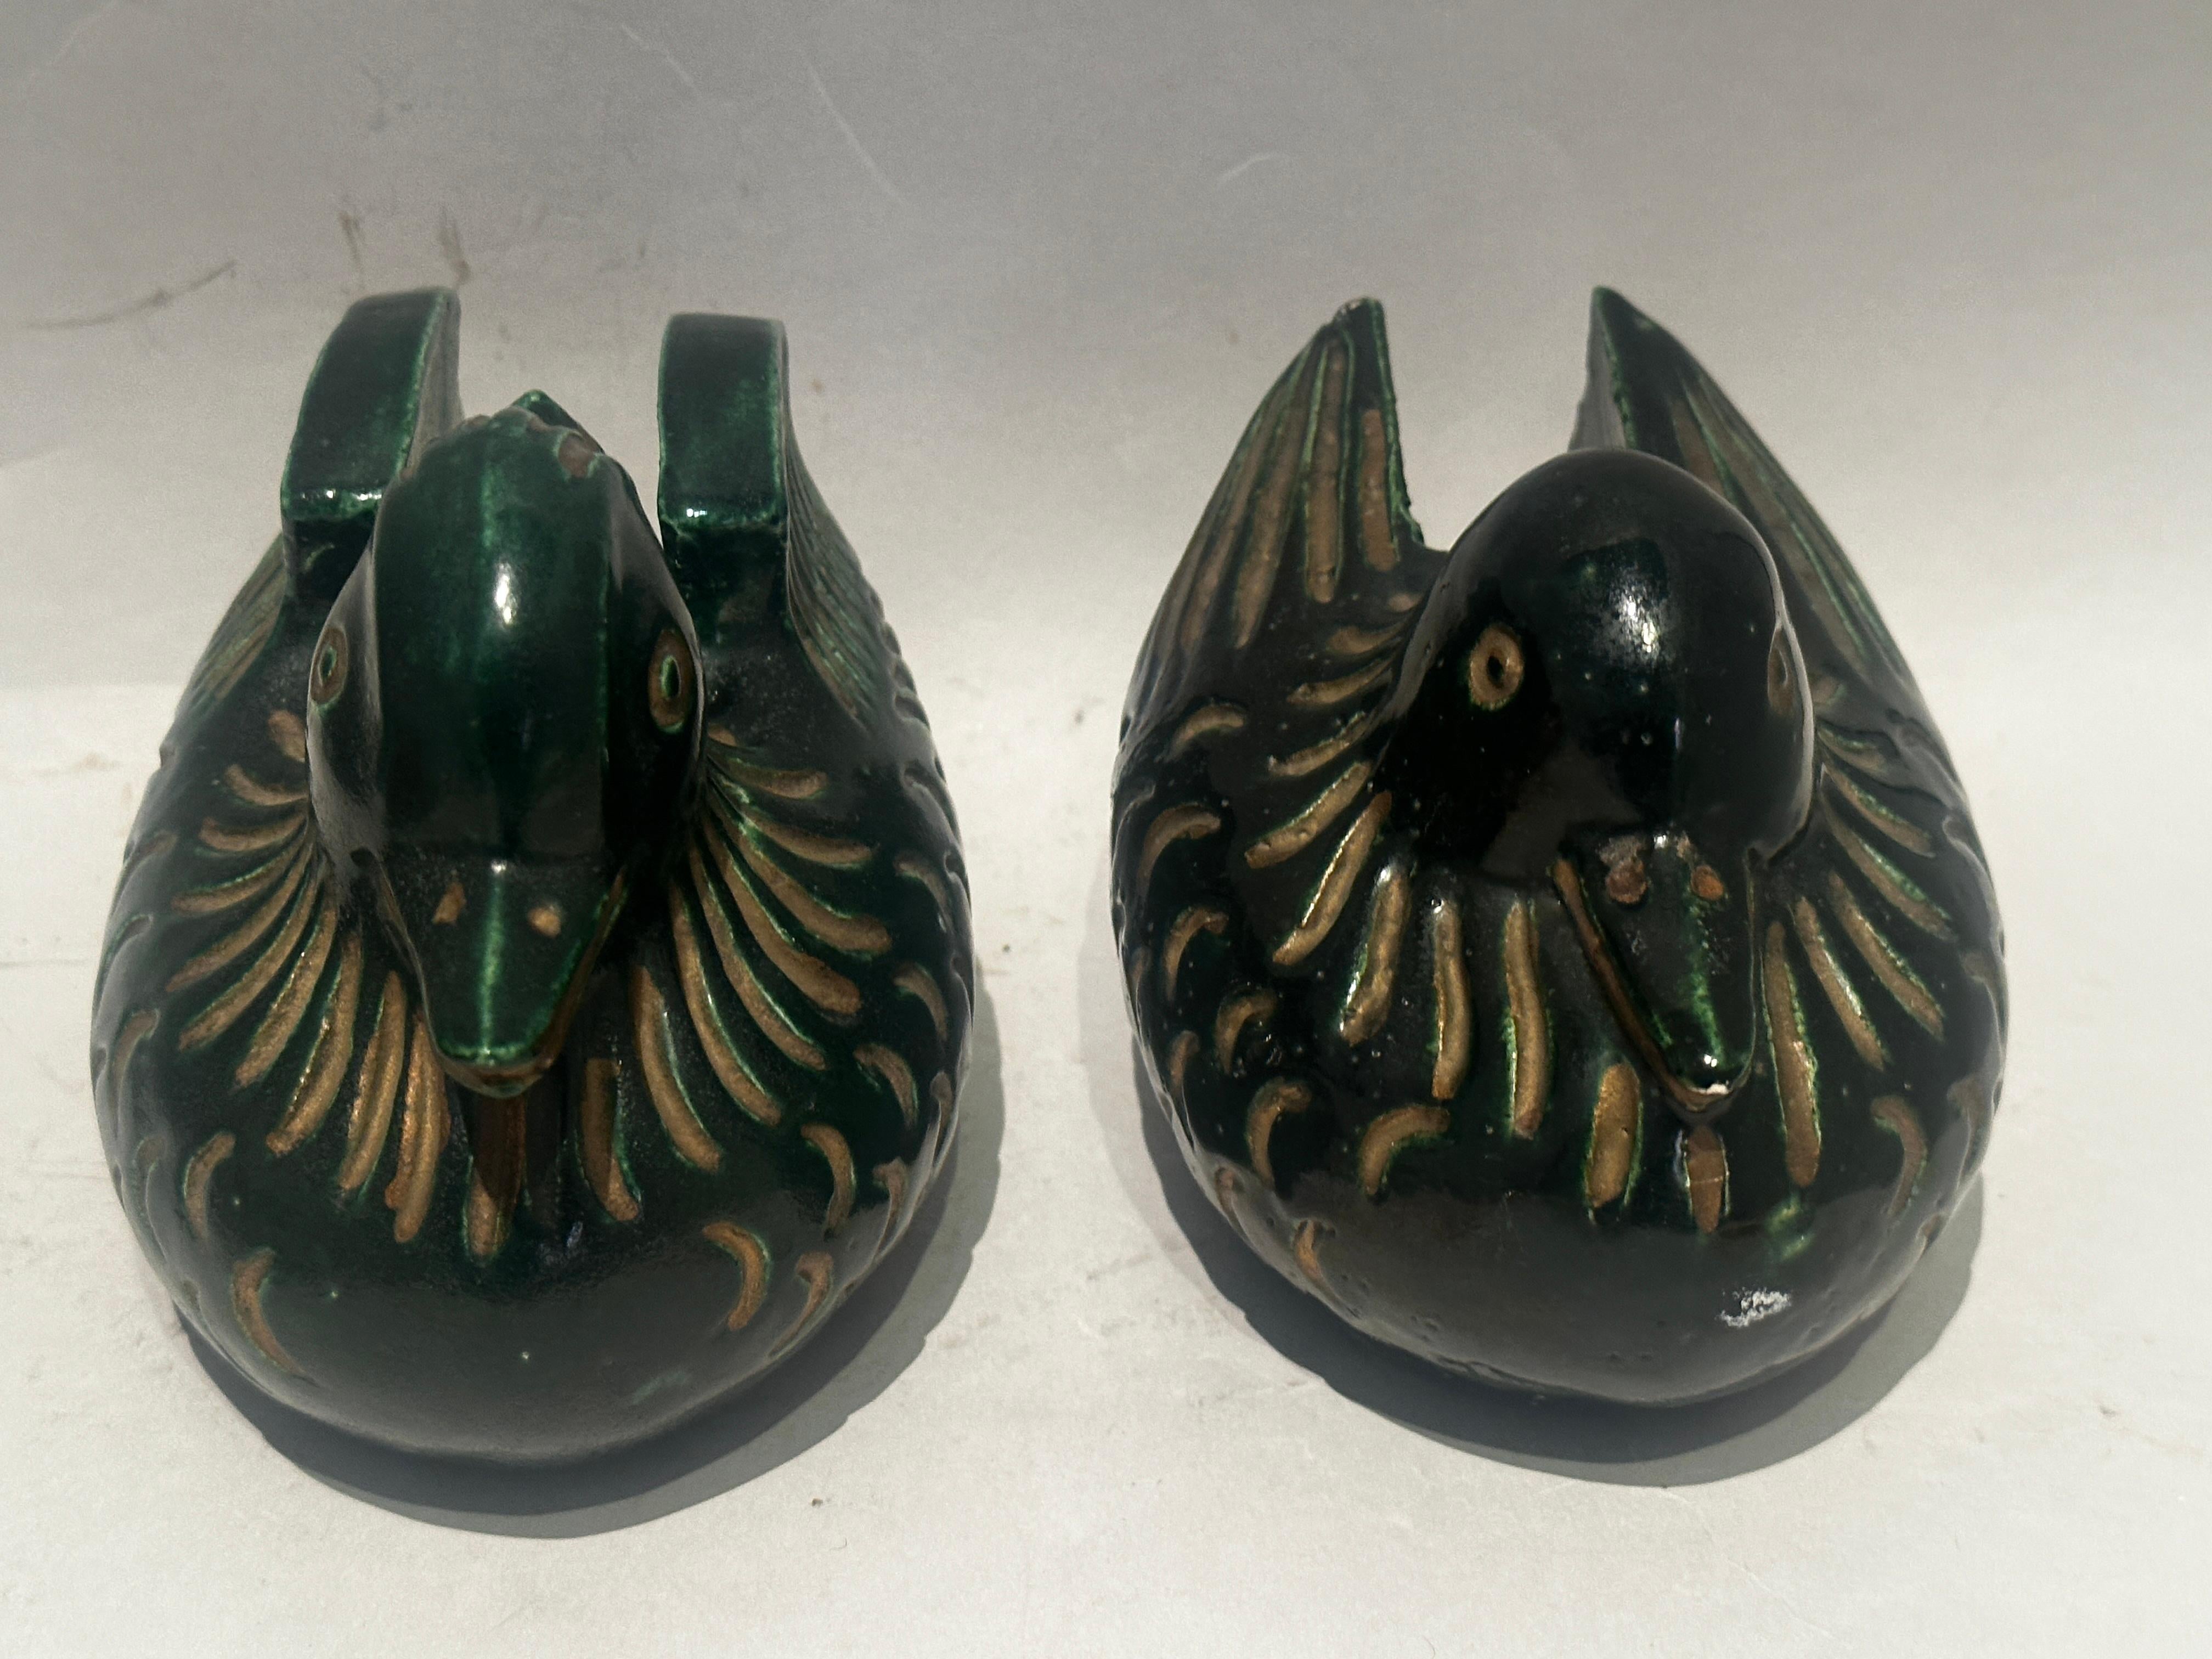 Pair of Japanese hand cast Mandarin duck screen holders. Glazed ceramic with cutouts to allow ends of standing screens to securely rest inside them. Called bayou-hasami or bayou-osae these holders were important in the summer when screens were used